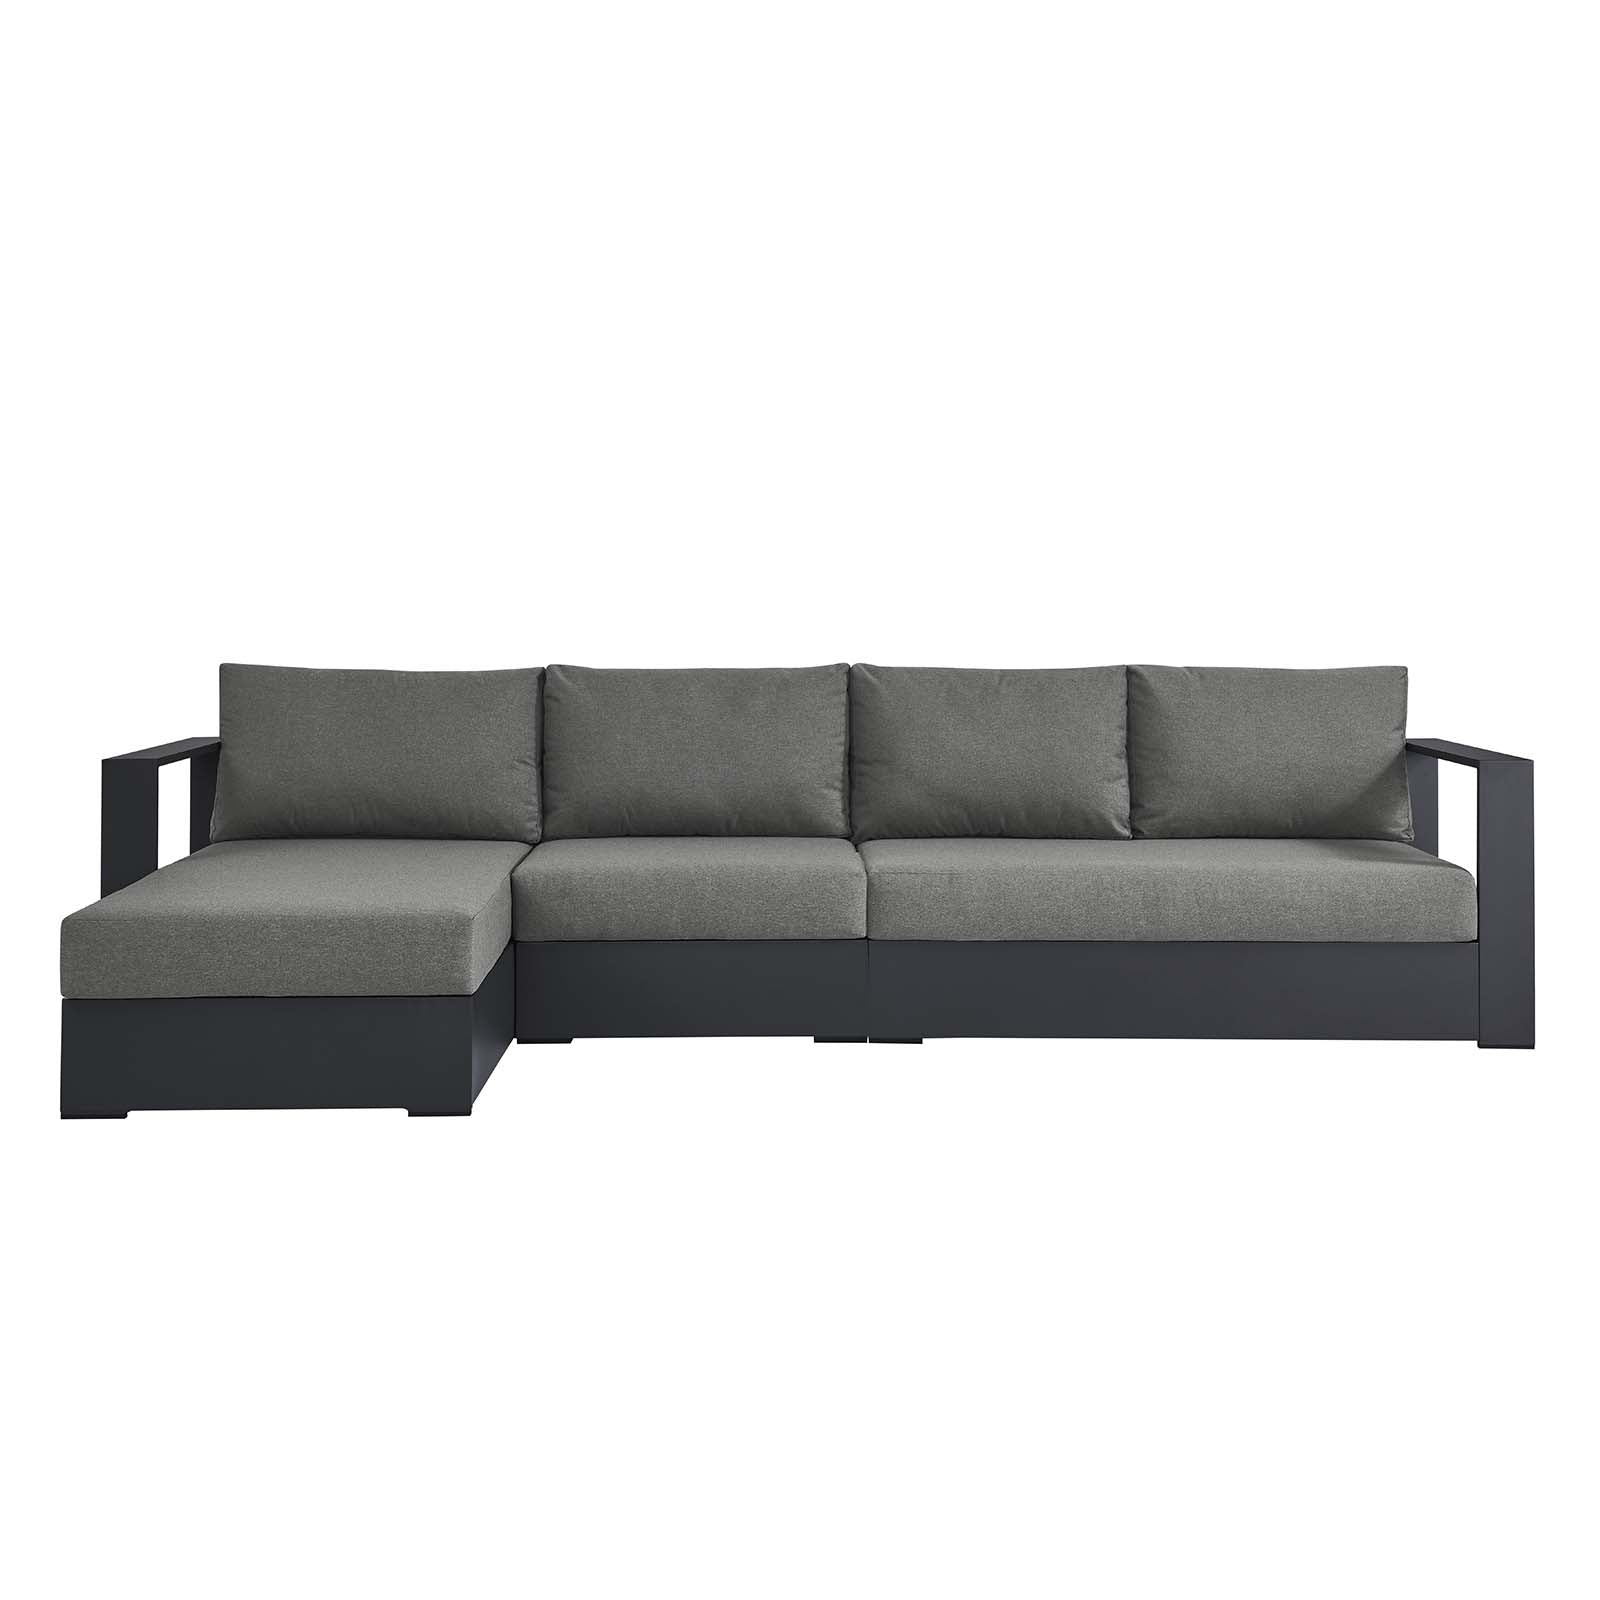 Tahoe Outdoor Patio Powder-Coated Aluminum 3-Piece Left-Facing Chaise Sectional Sofa Set - East Shore Modern Home Furnishings